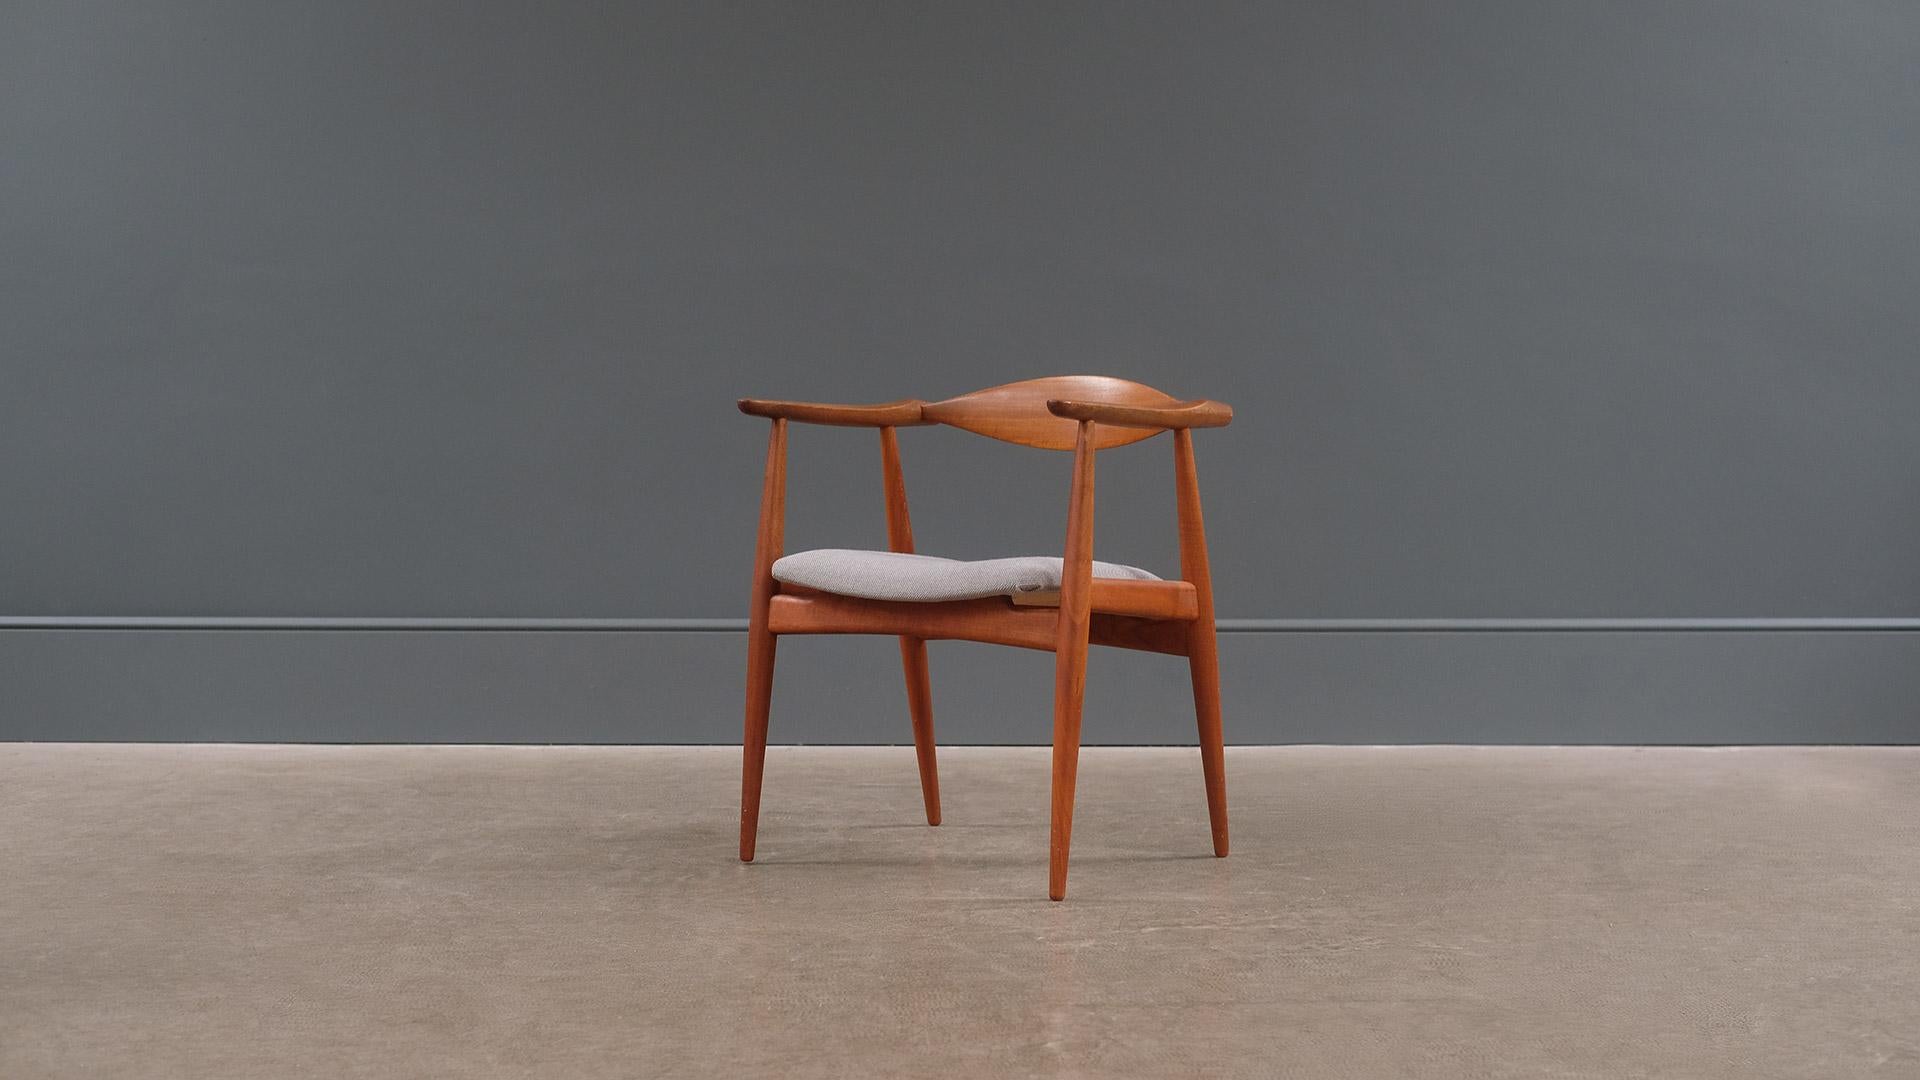 Rare model CH35 chair designed by Hans Wegner for Carl Hansen, Denmark. Very beautiful armchair in solid teak with fantastic grain. Newly upholstered seat in Kvadrat Hallingdal.